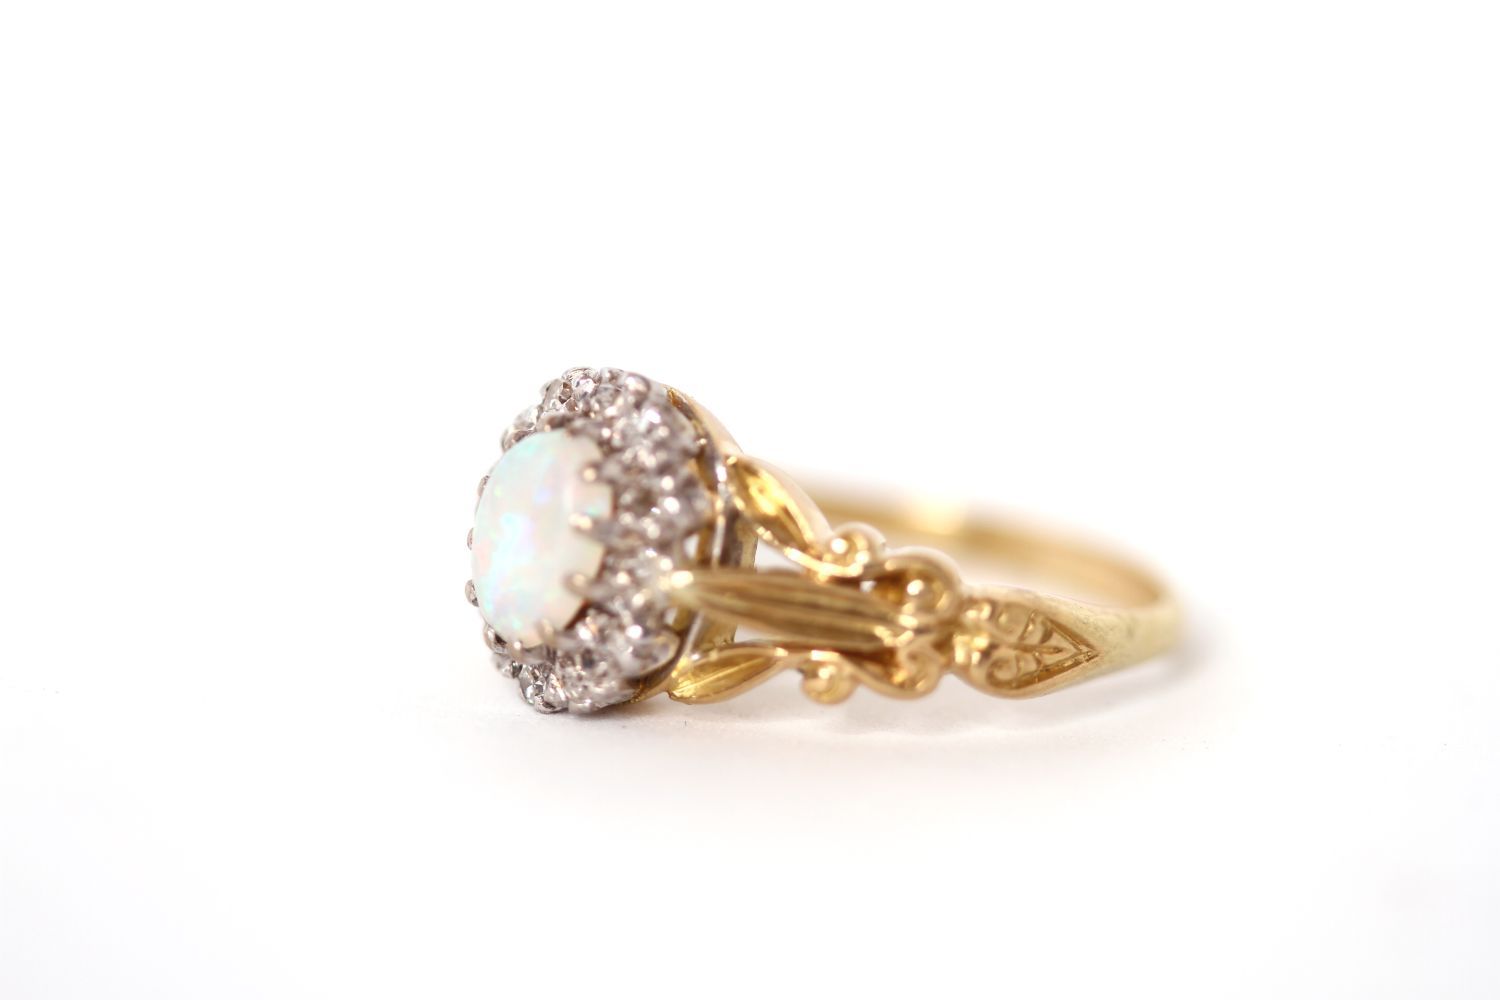 Opal and Diamond cluster ring, cabochon oval cut Opal with rose cut diamonds, fancy splitting the